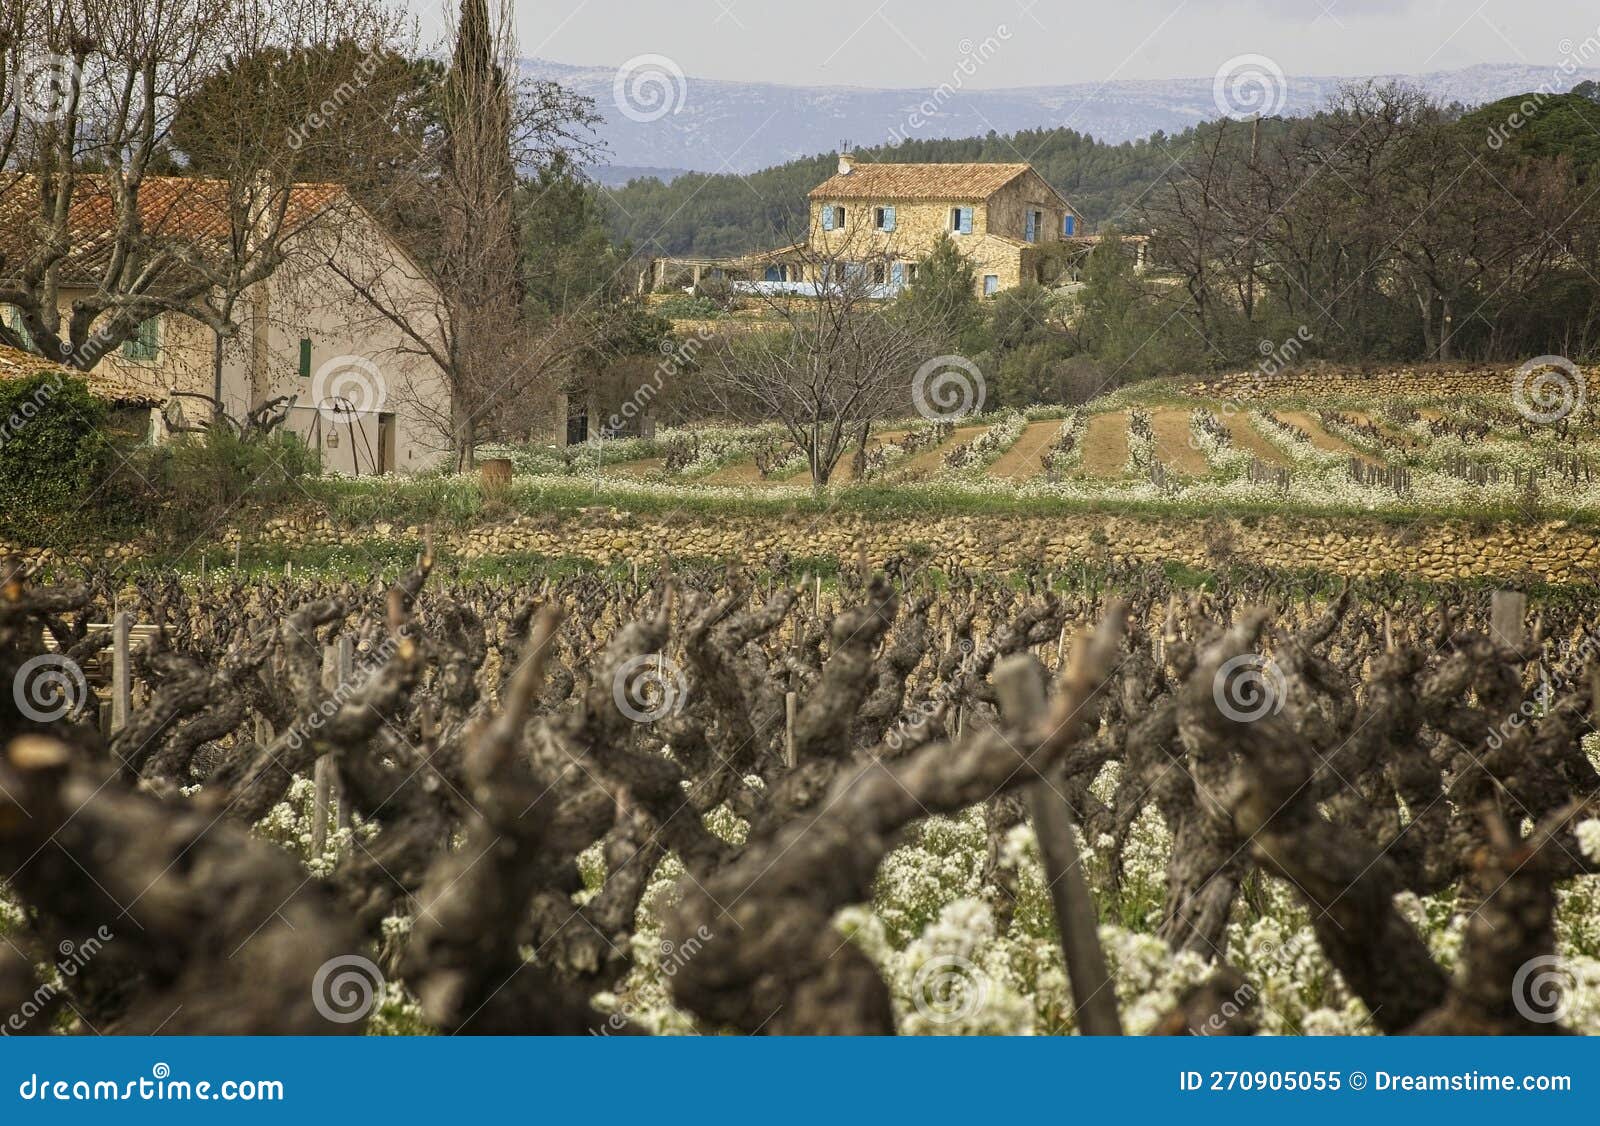 vines, vineyards, and estates in the bandol appellation of the wine region in provence, france.